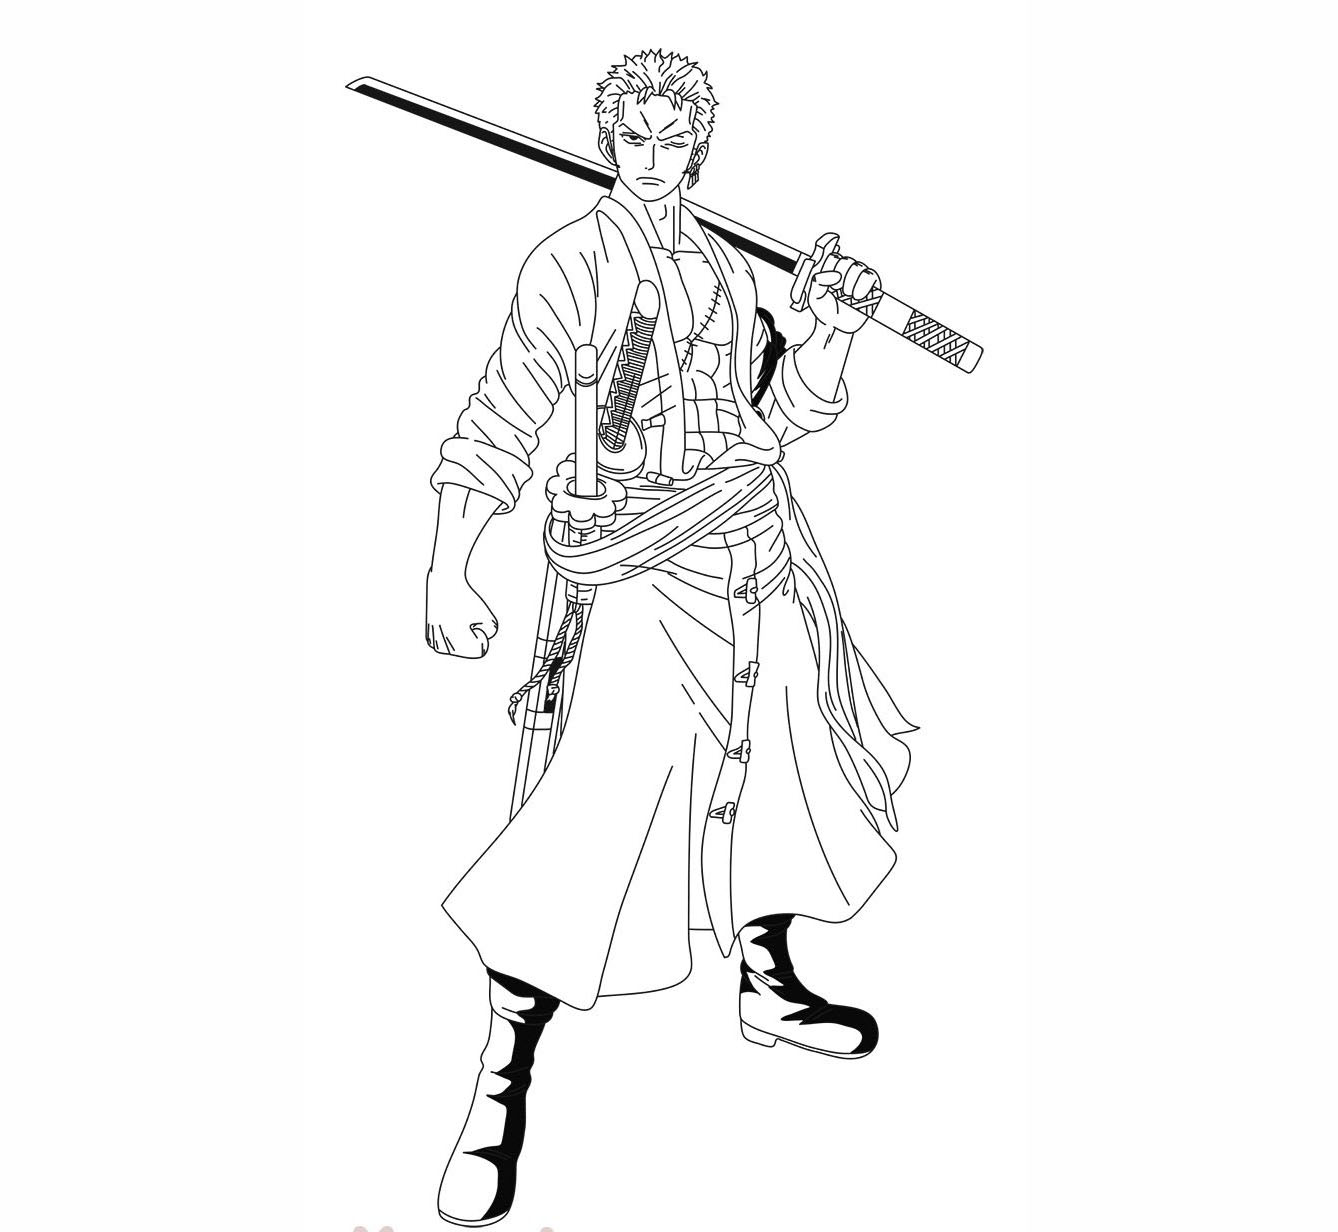 Génial Zoro coloring page